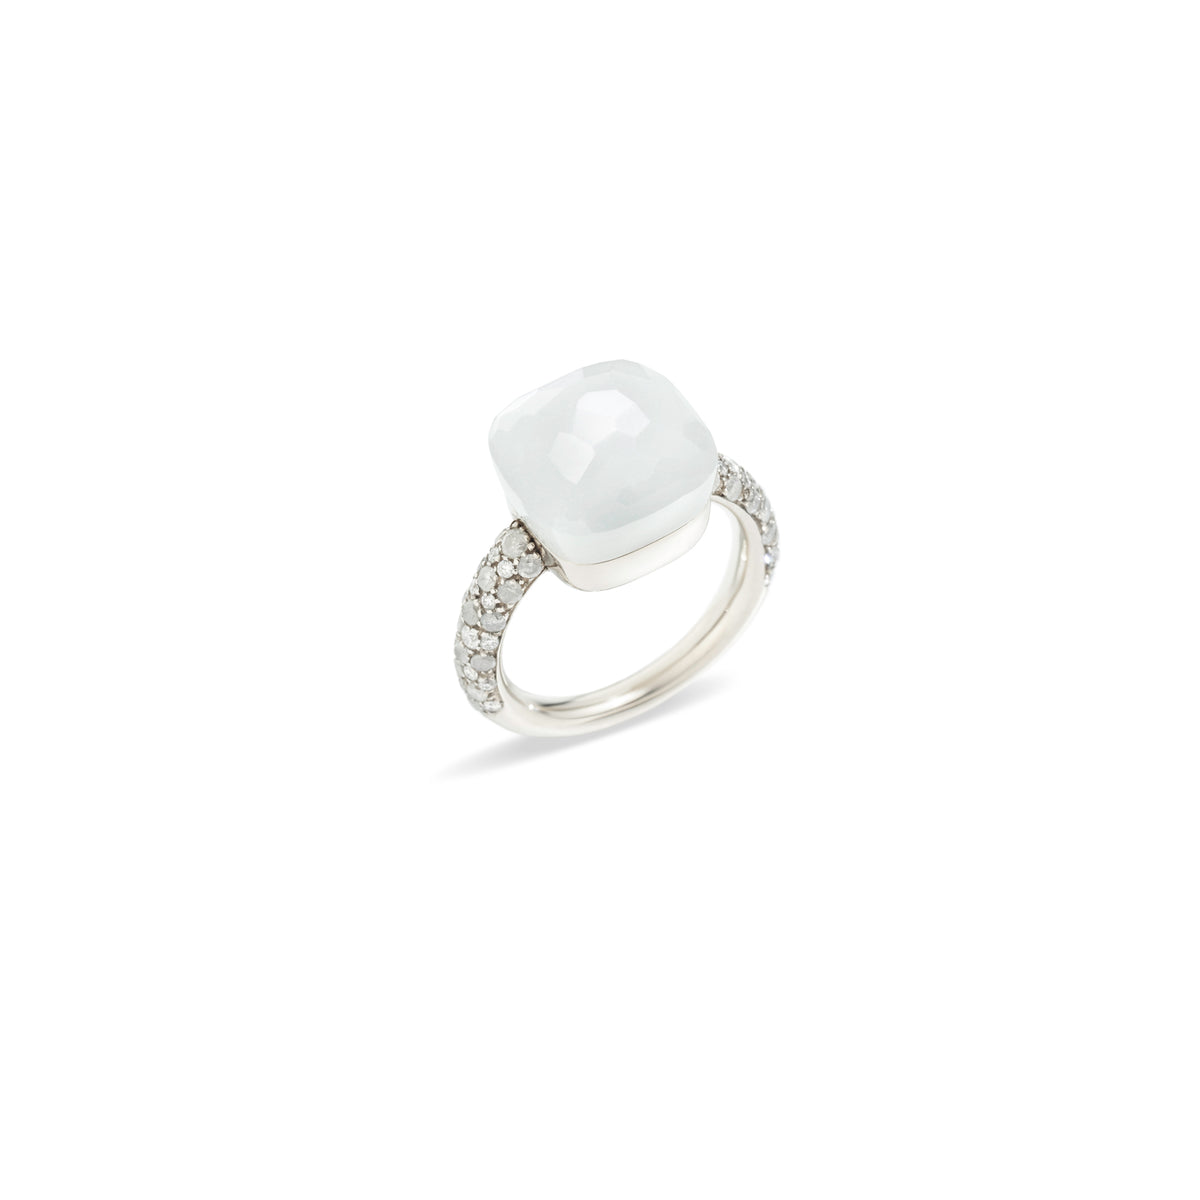 Nudo Maxi Diamond Ring in 18k White Gold with Moonstone and Diamonds - Orsini Jewellers NZ